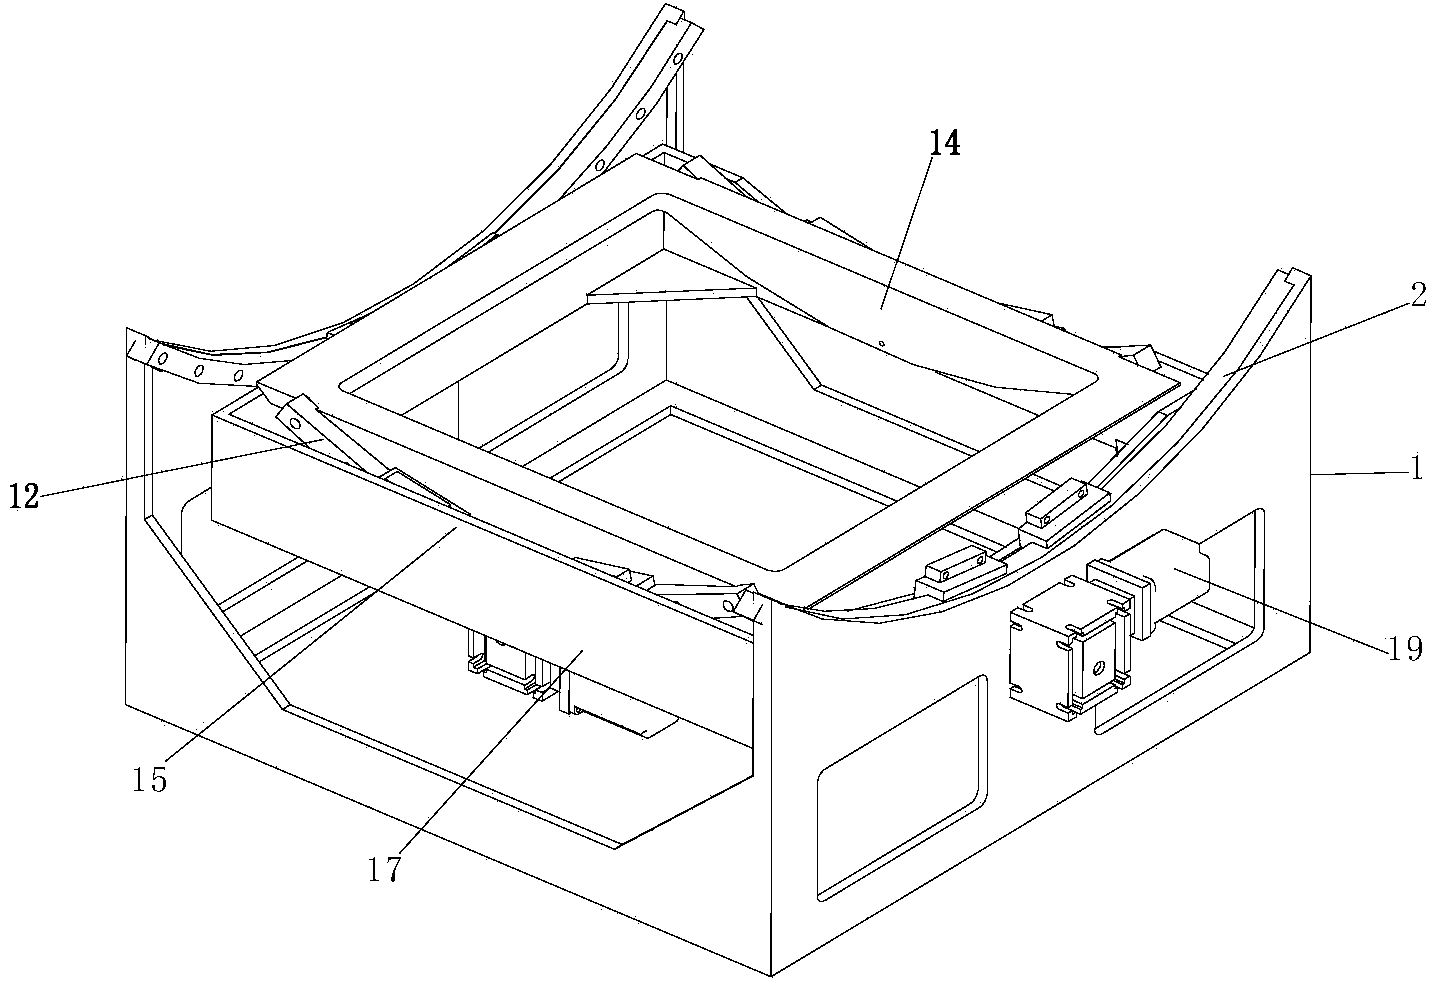 Movement scanning device of high-intensity focused ultrasonic treatment system